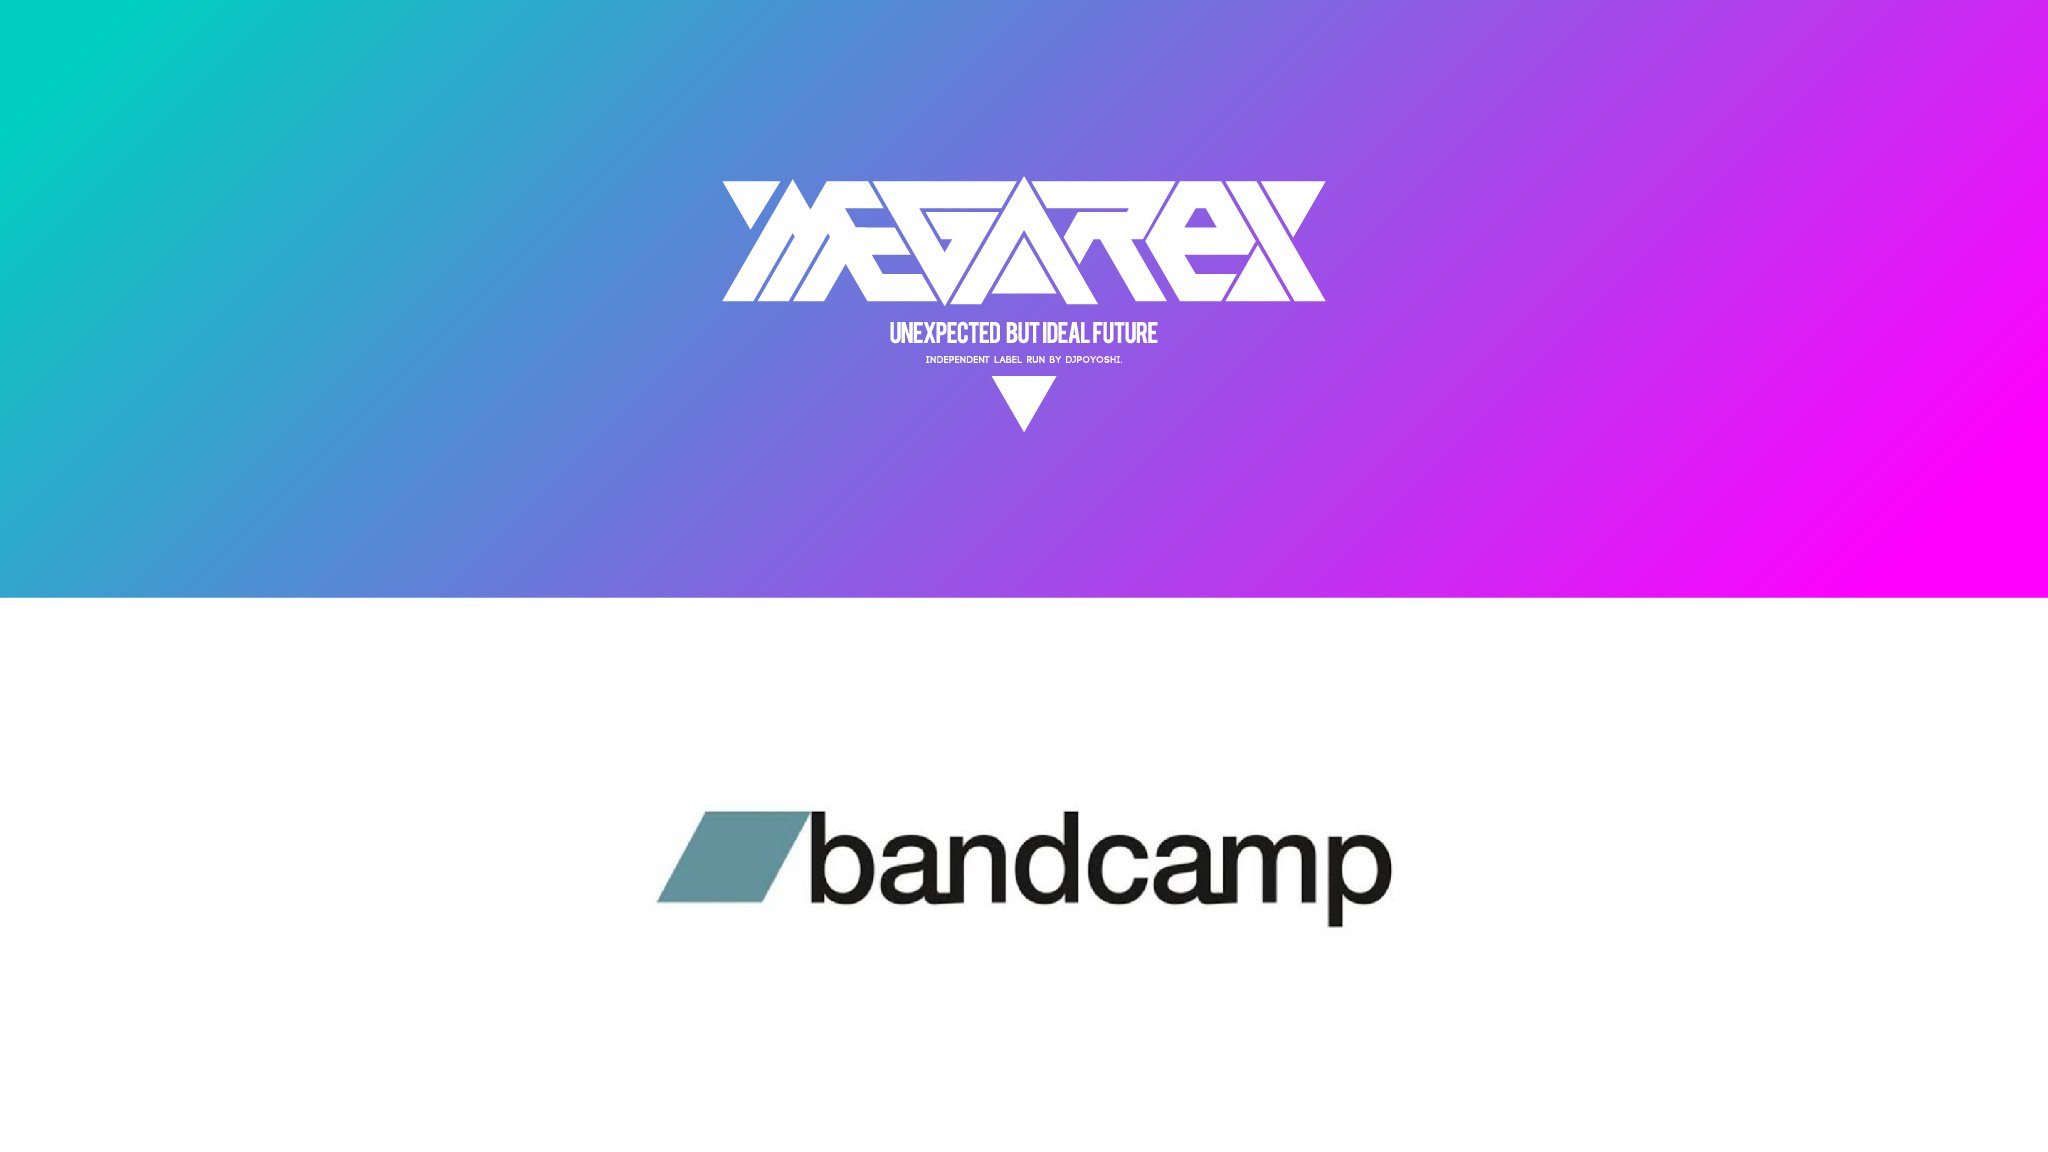 Megarex The Megarex Bandcamp Is Now Open Please Spread The Word So That It Reaches Music Lovers Around The World While Our Line Up Isn T A Large One It Will